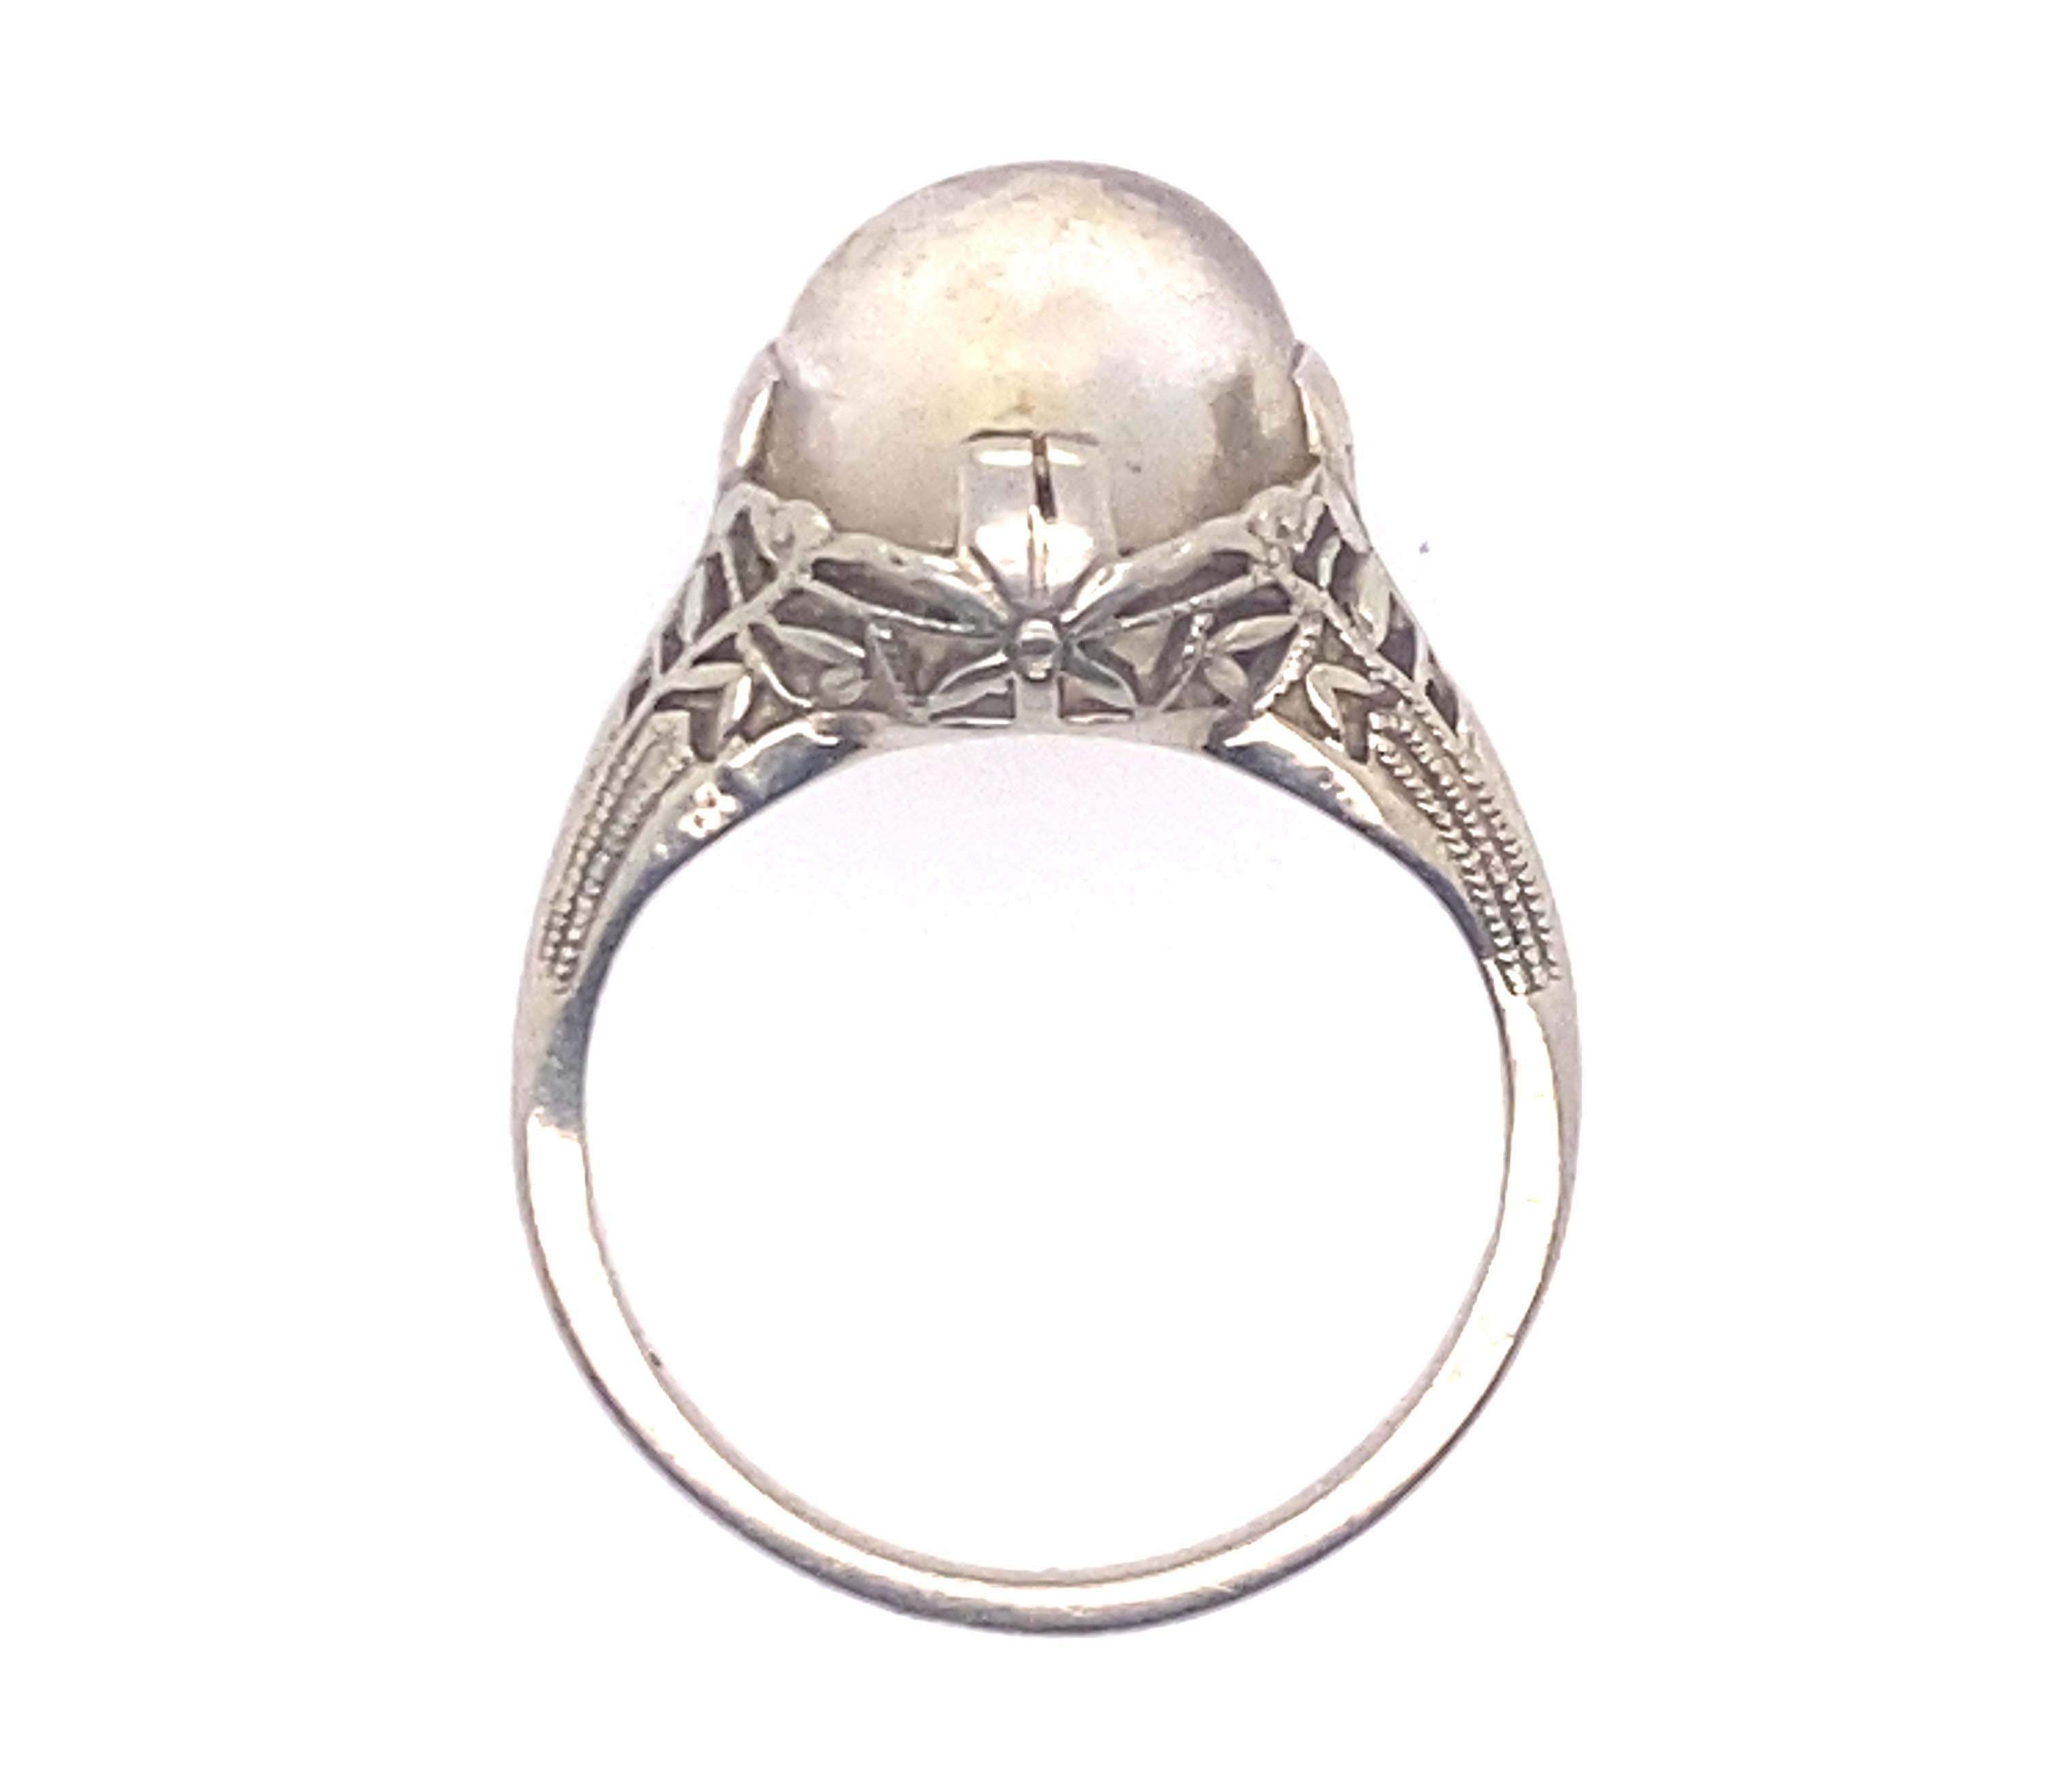 Vintage Style Pieces of Opal Gemstone 18K White Gold Cocktail Crystal Ball Ring



Vintage Style Setting

Pieces of Genuine Opal Gemstone Encased in 